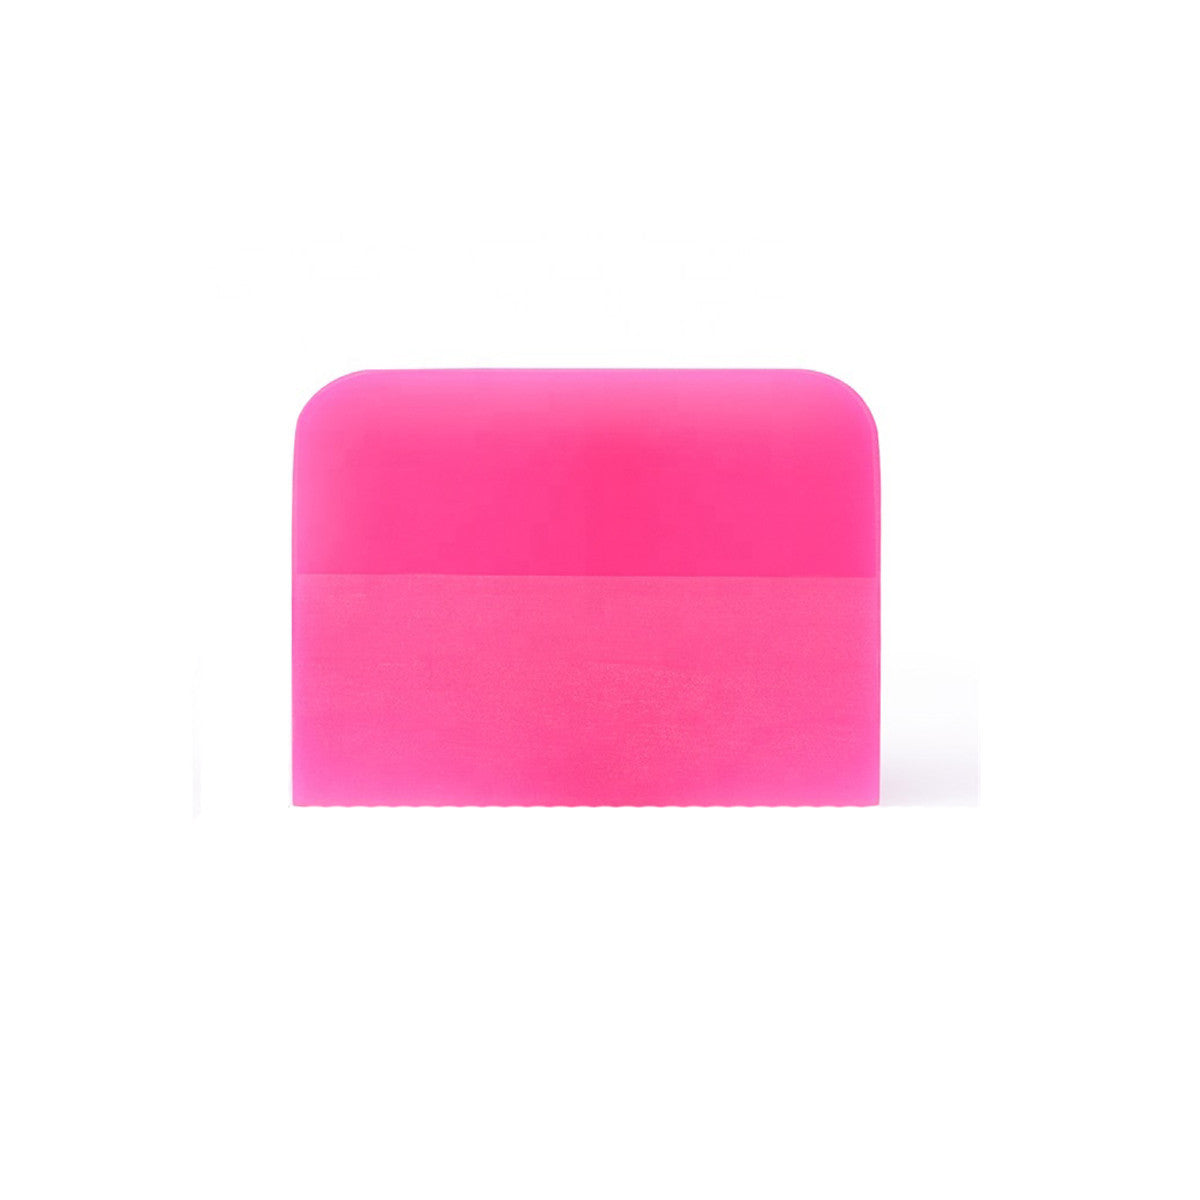  Pink Specialty Squeegee, water wiper